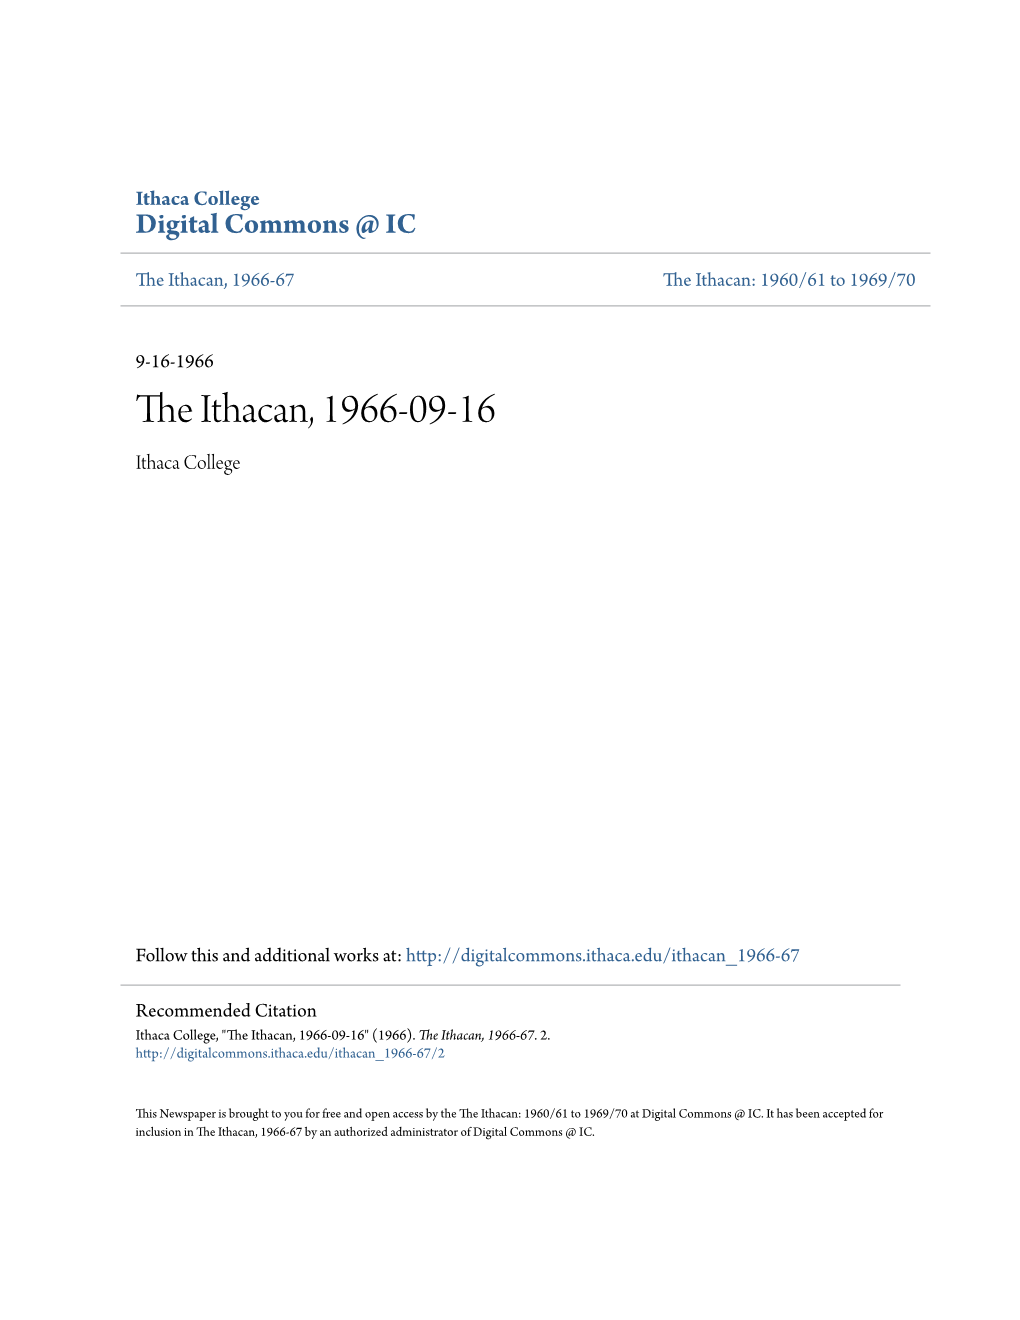 The Ithacan, 1966-09-16